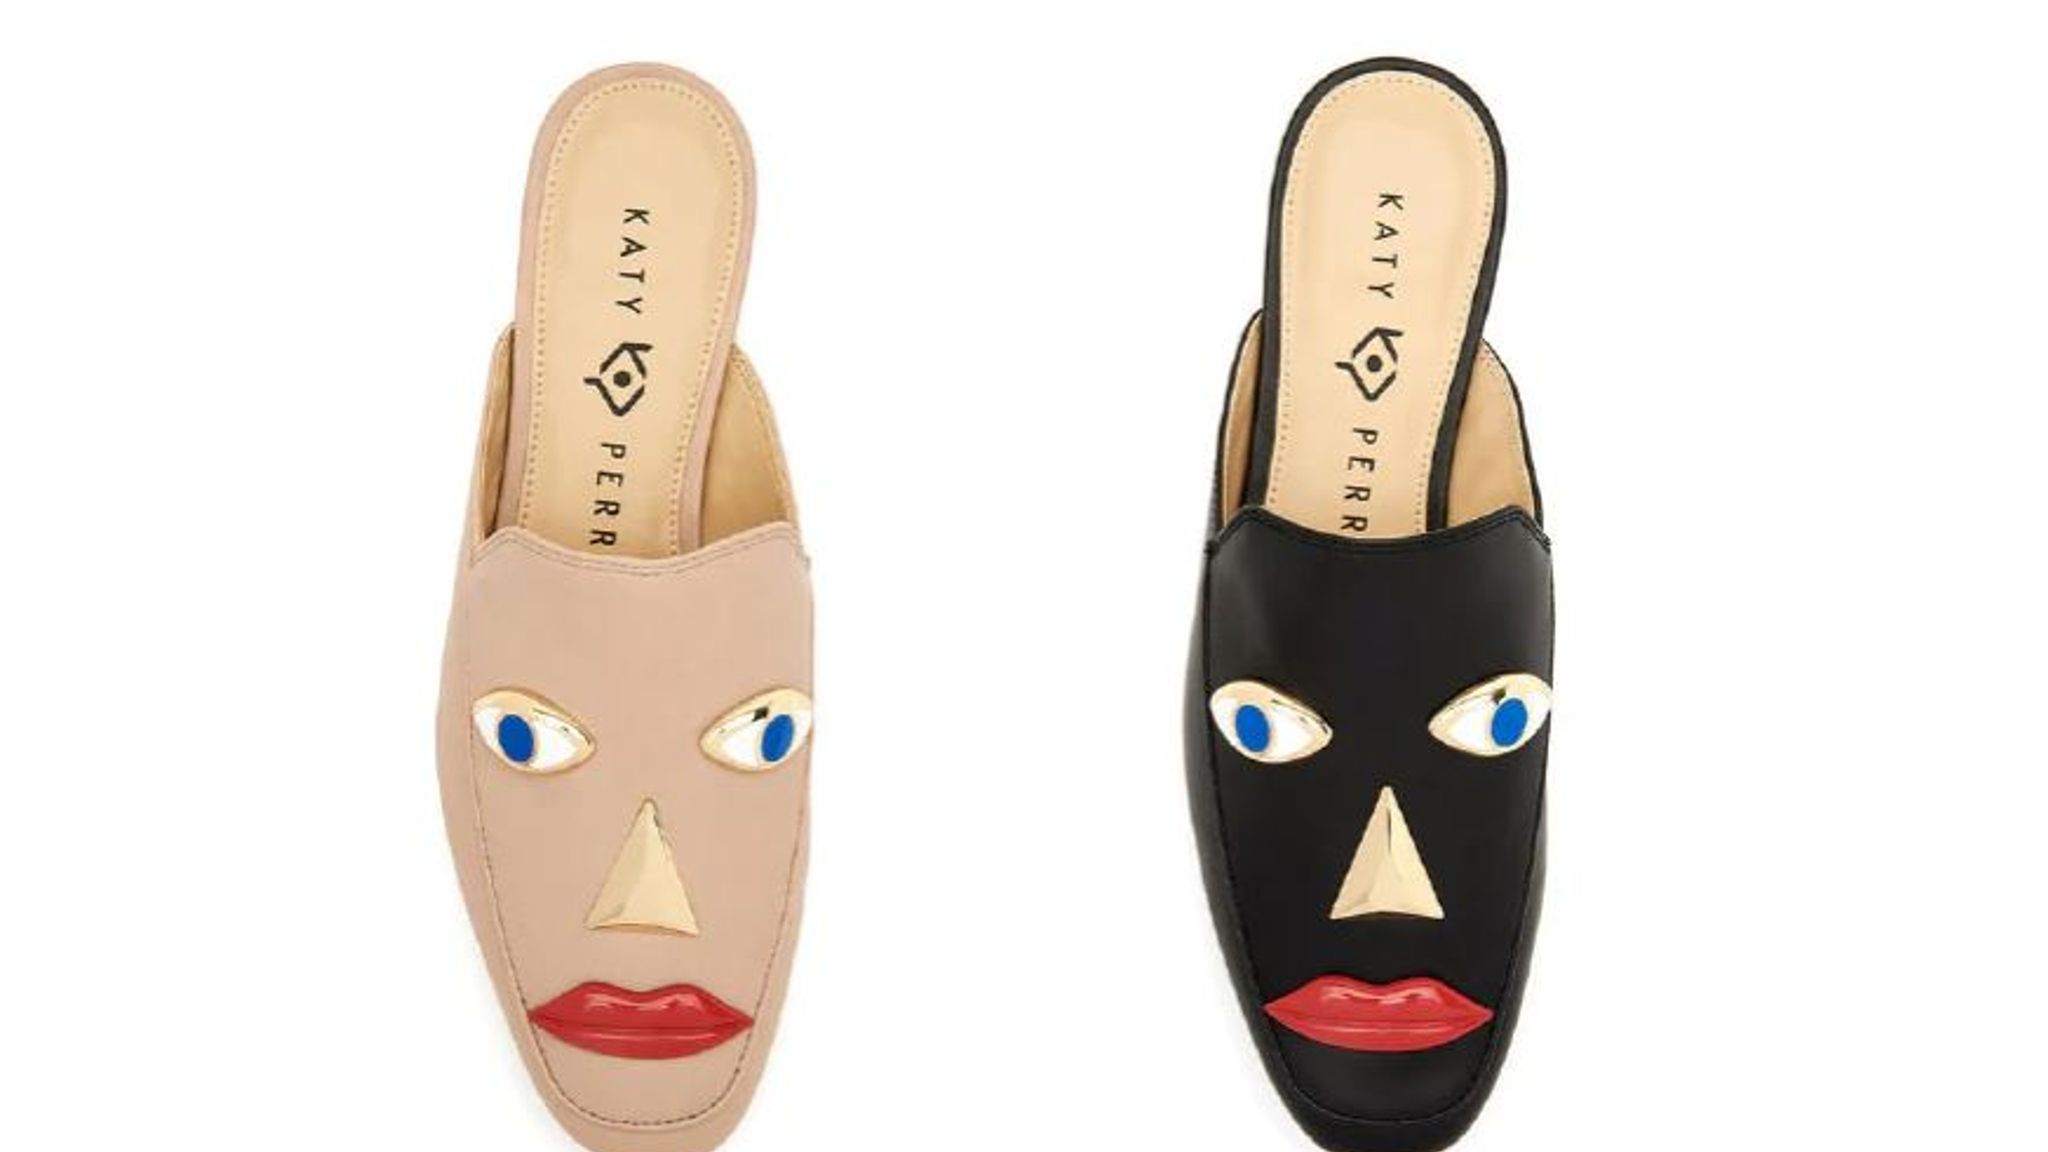 Katy Perry Saddened As Her Shoe Line Is Taken Off Shelves For Being Racist Ents Arts News Sky News